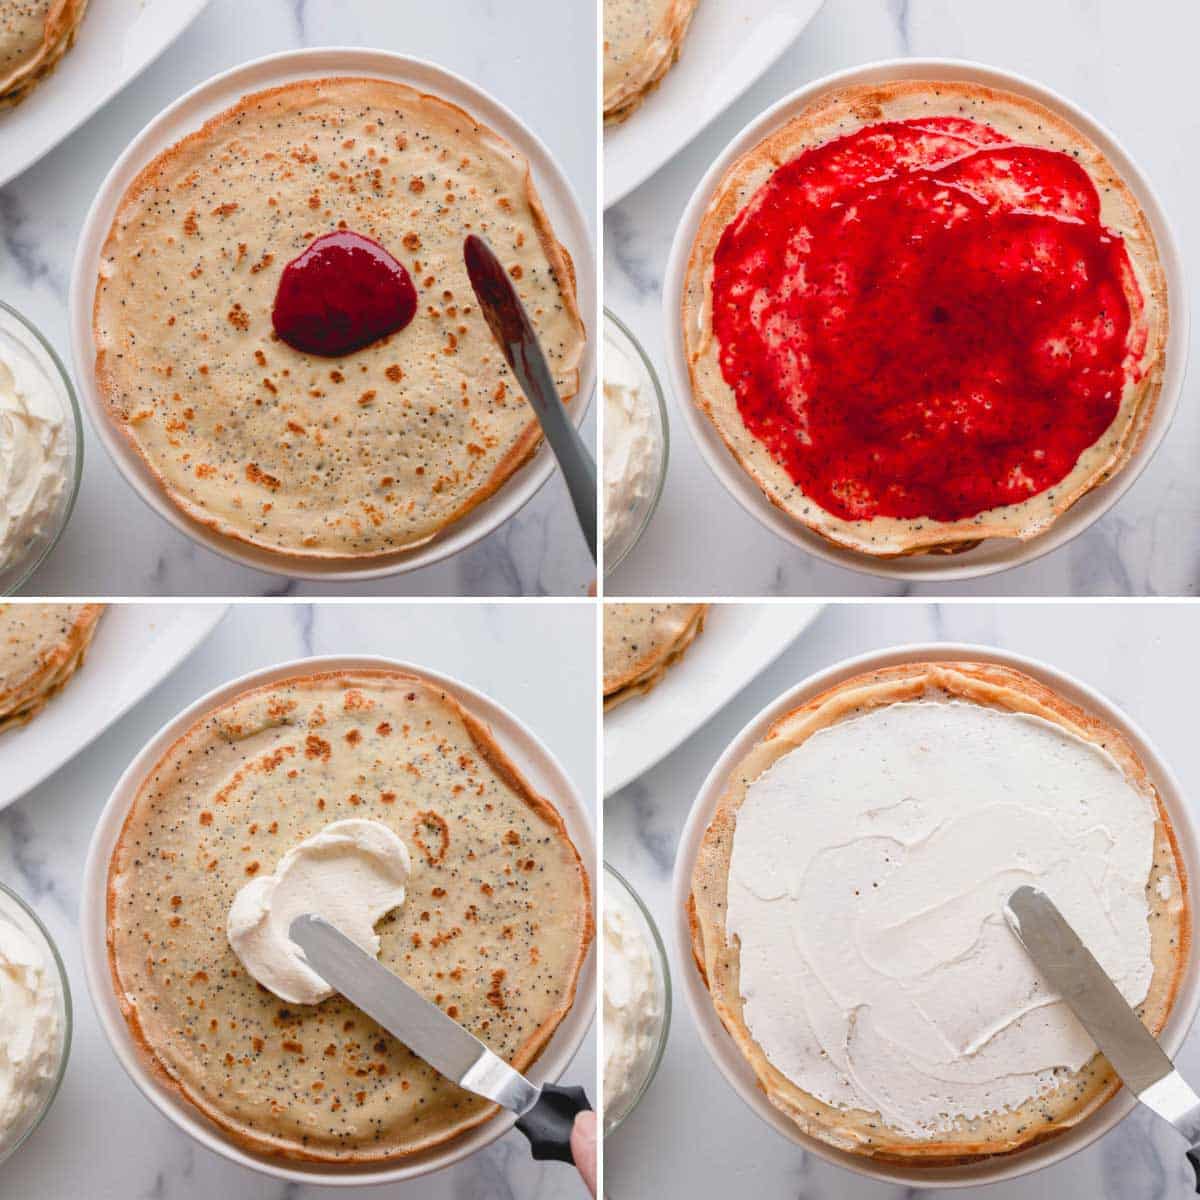 Step by step photos of assembling the crepe cake.